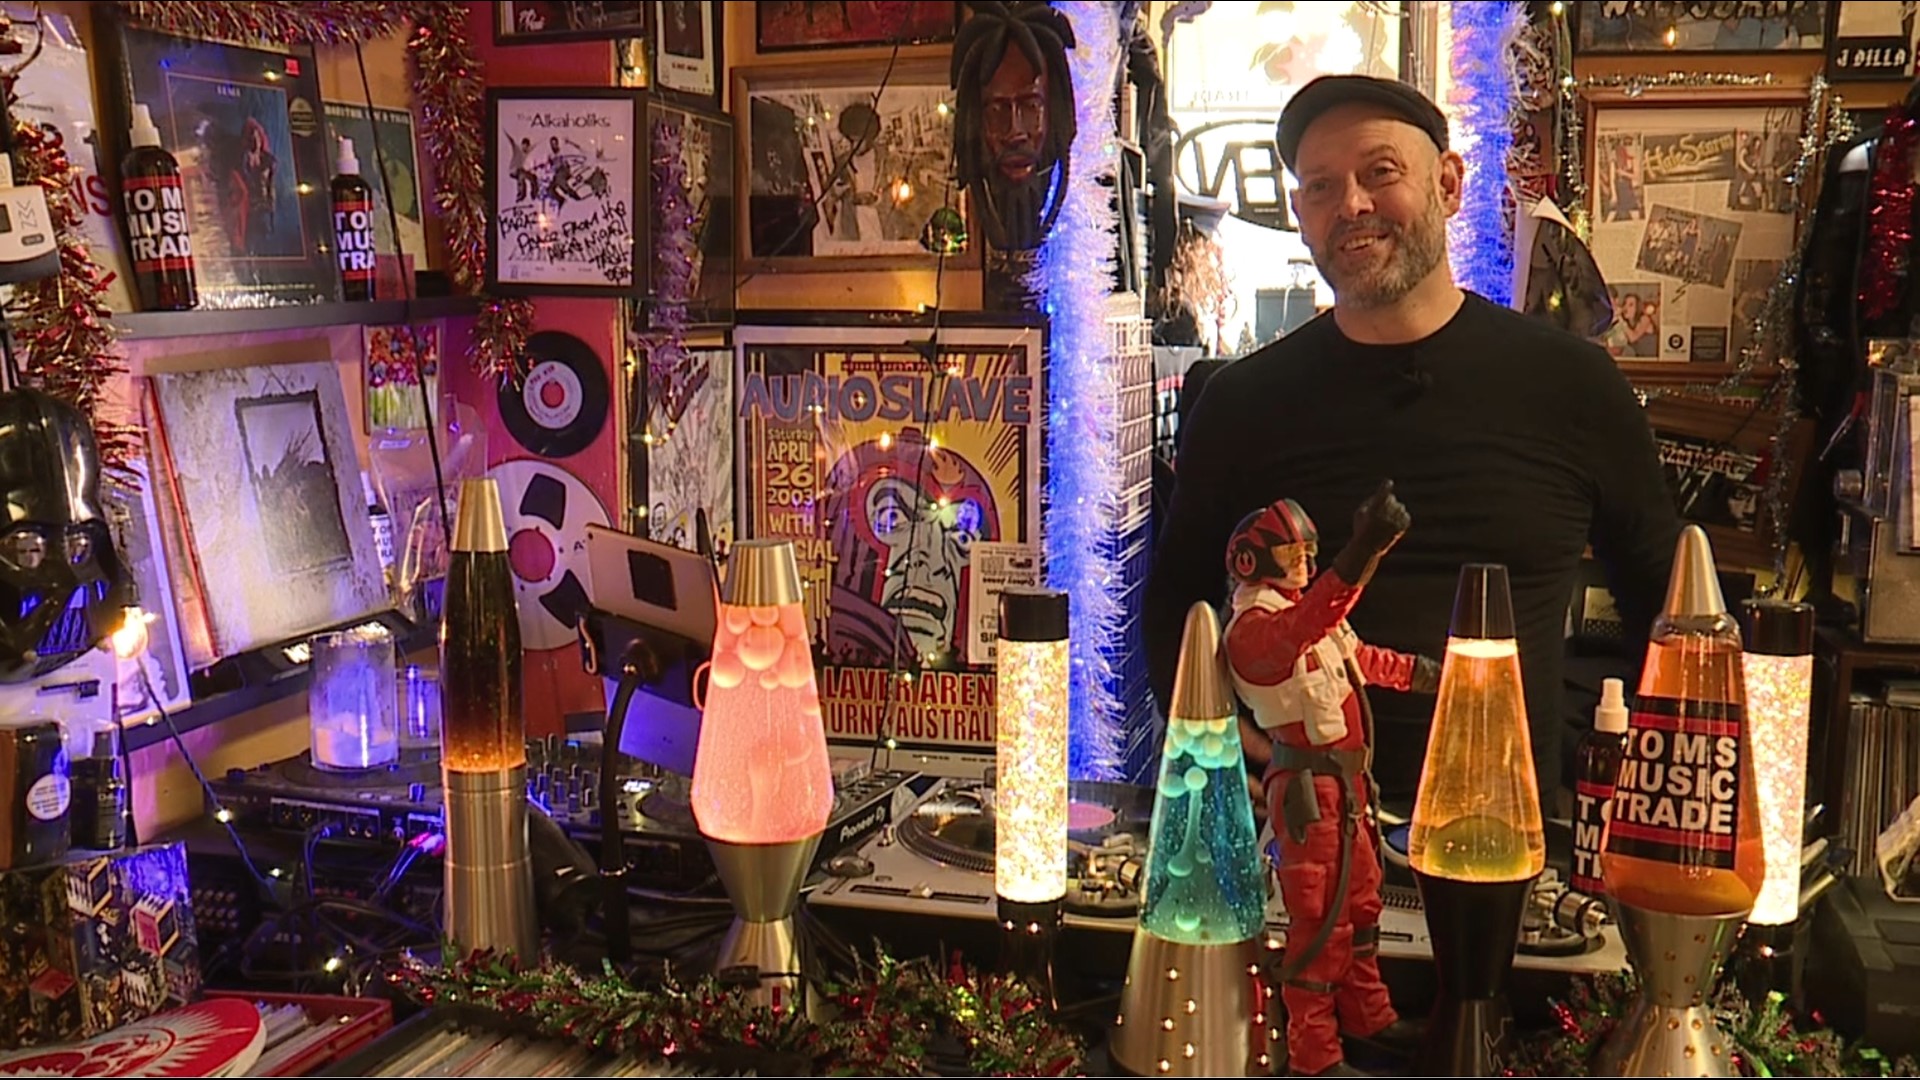 The shop's owner, Thomas Anderton, says that he's obsessed with music record and memorabilia, which led to him opening a museum at the rear of his Red Lion shop.